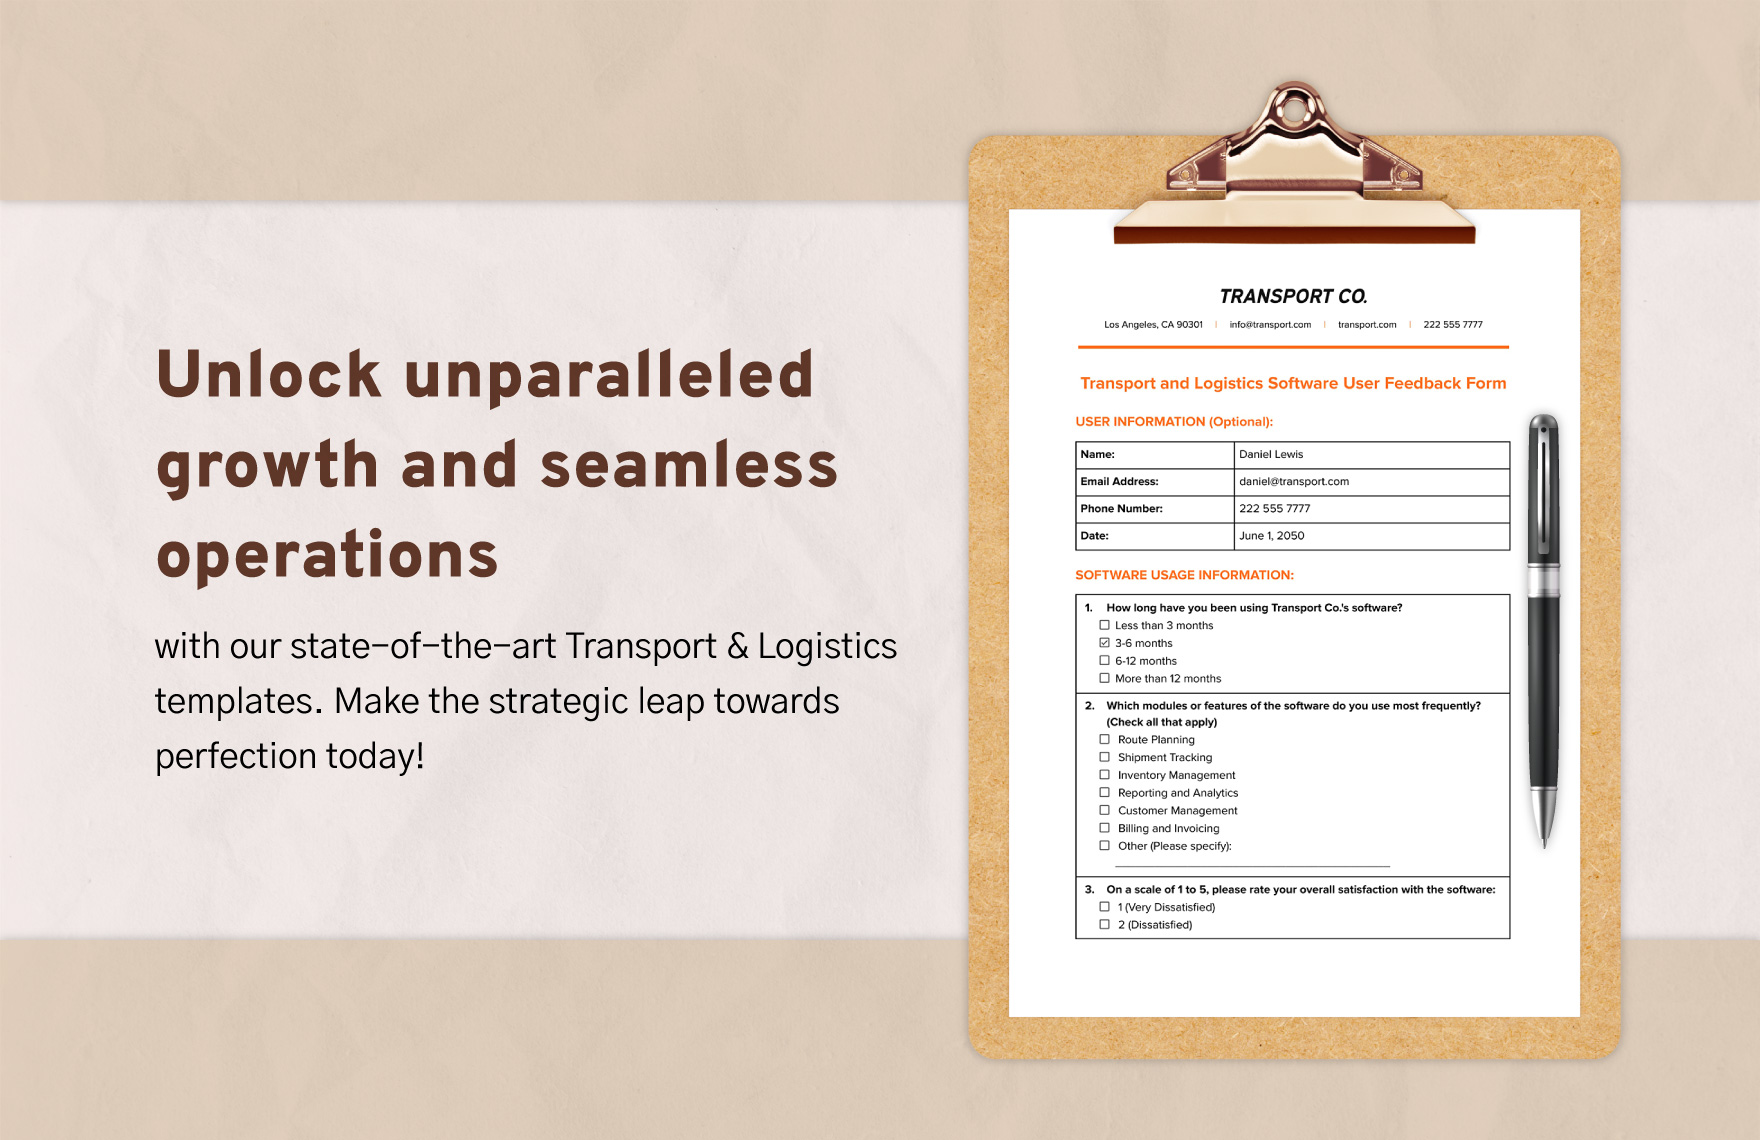 Transport and Logistics Software User Feedback Form Template